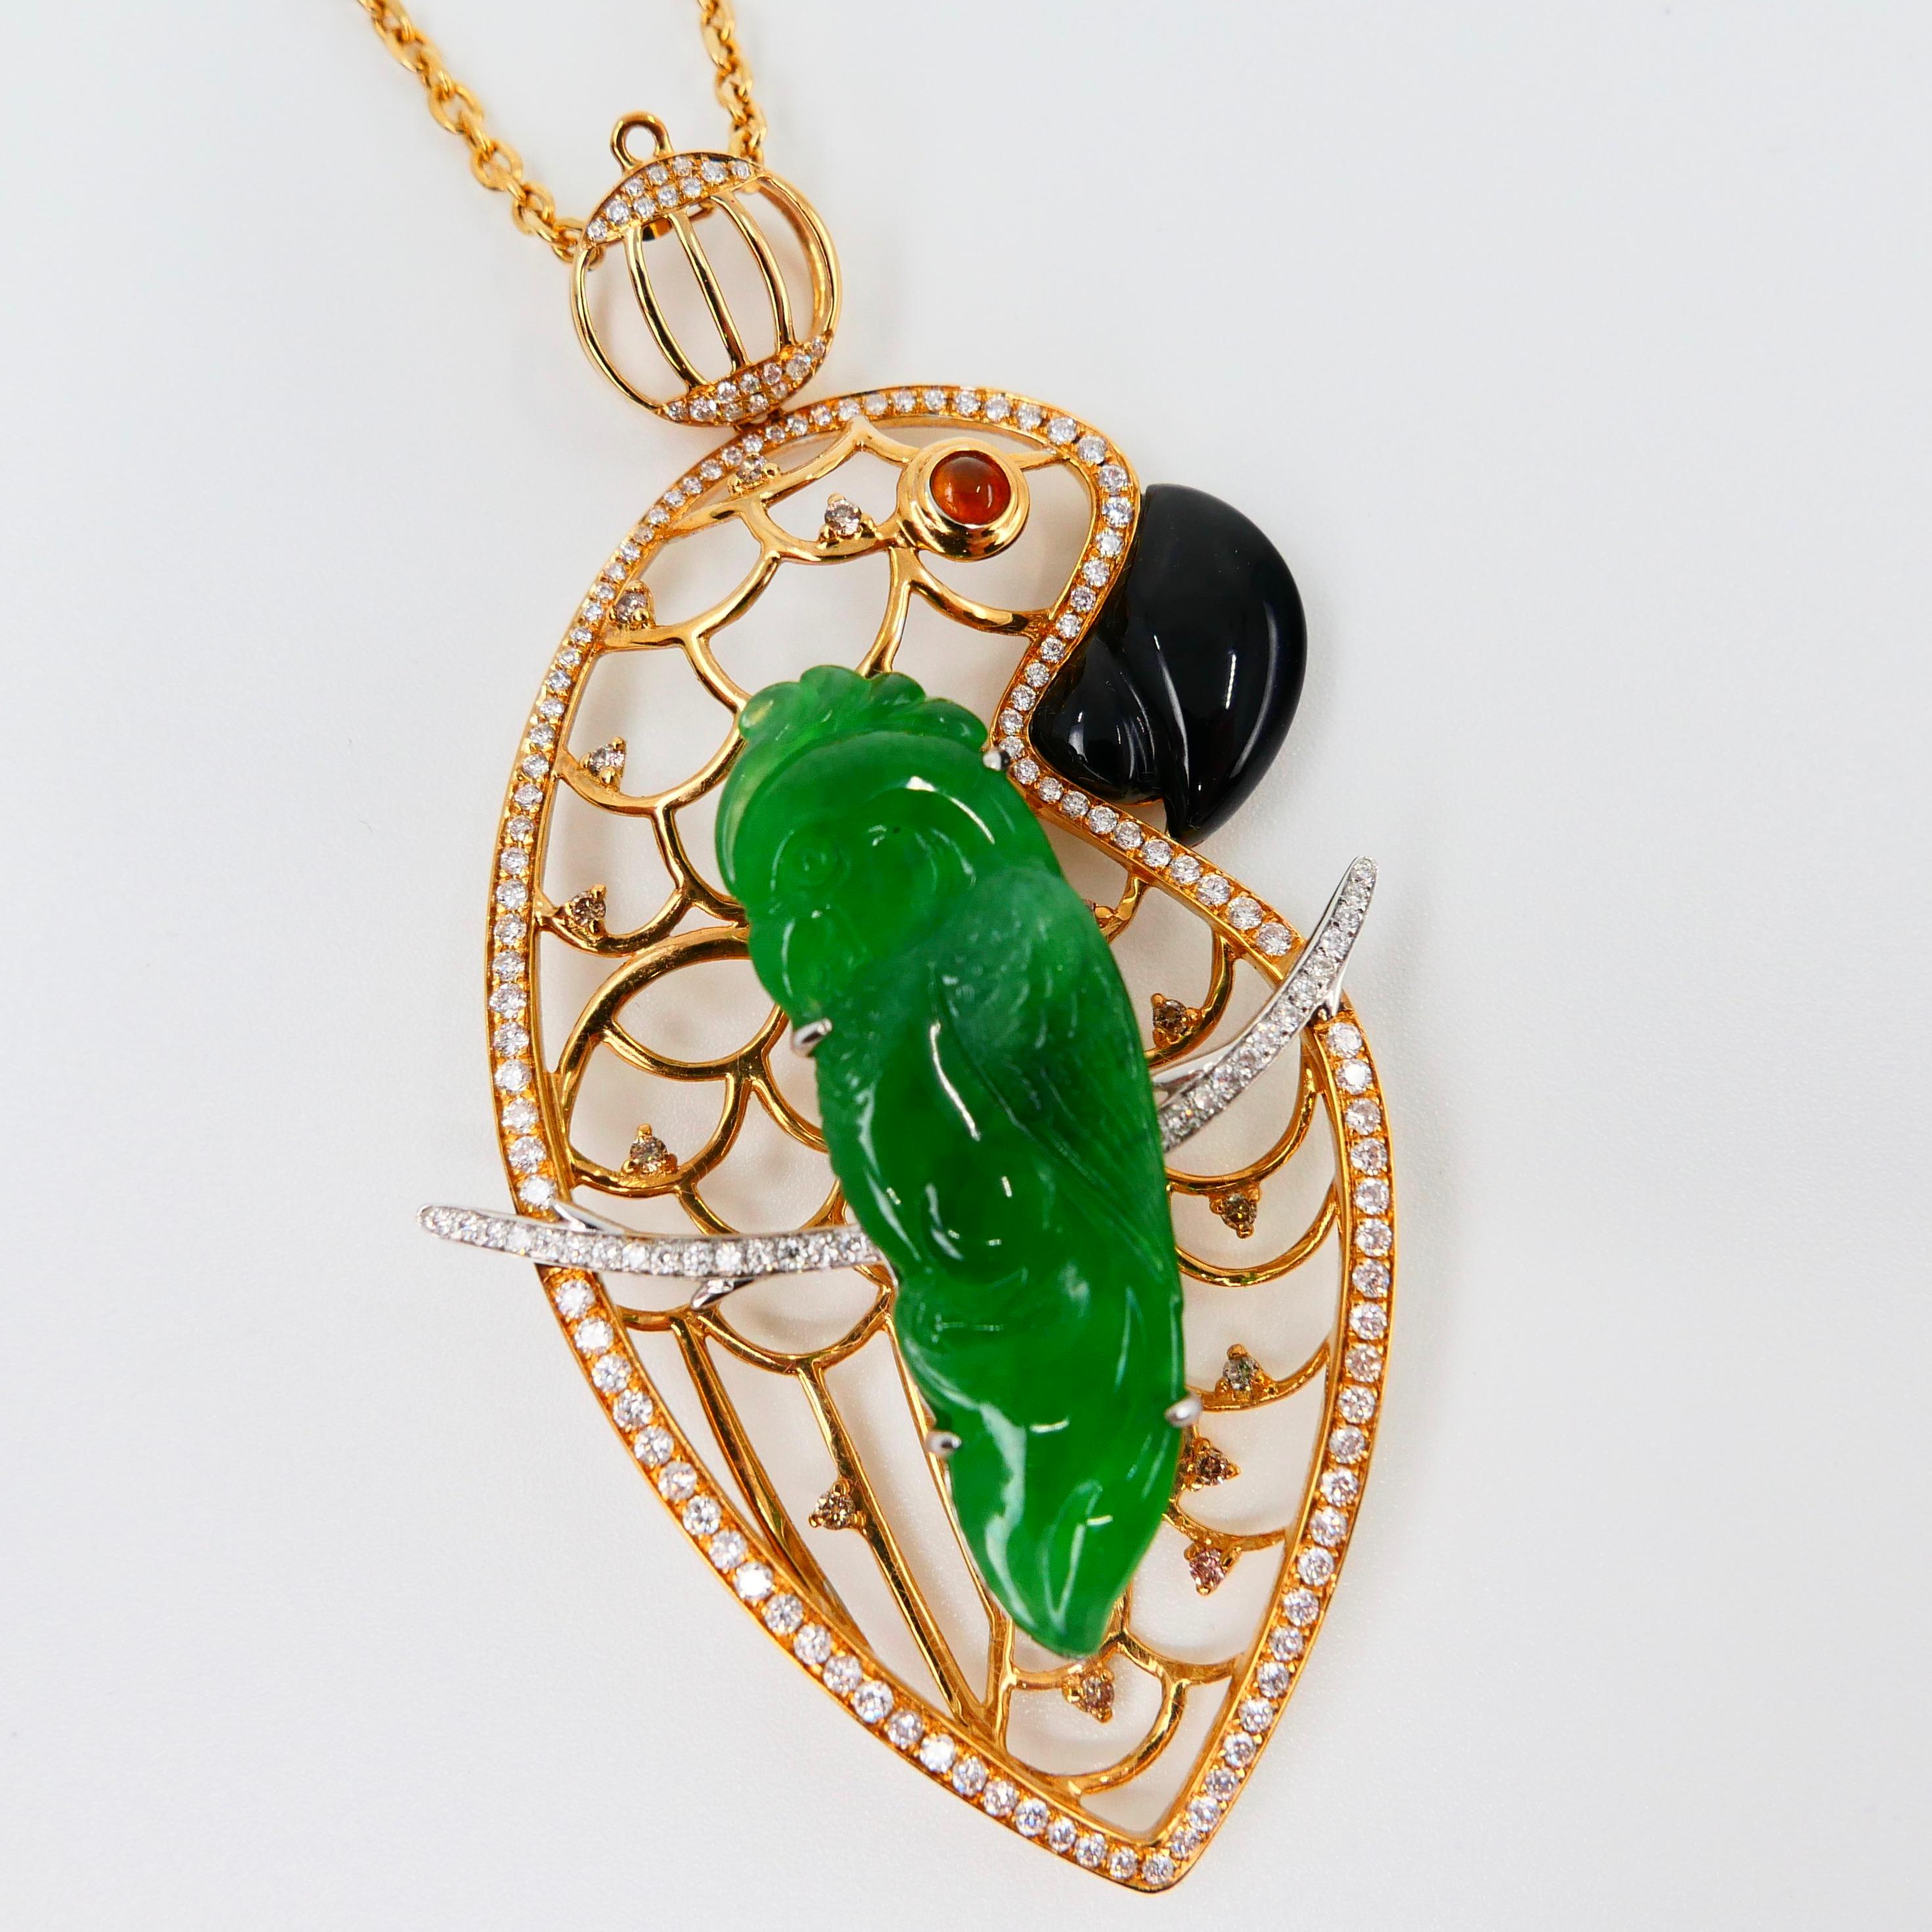 Certified Type A Jadeite Jade and Diamond Parrot Pendant, Vivid Green Color For Sale 1